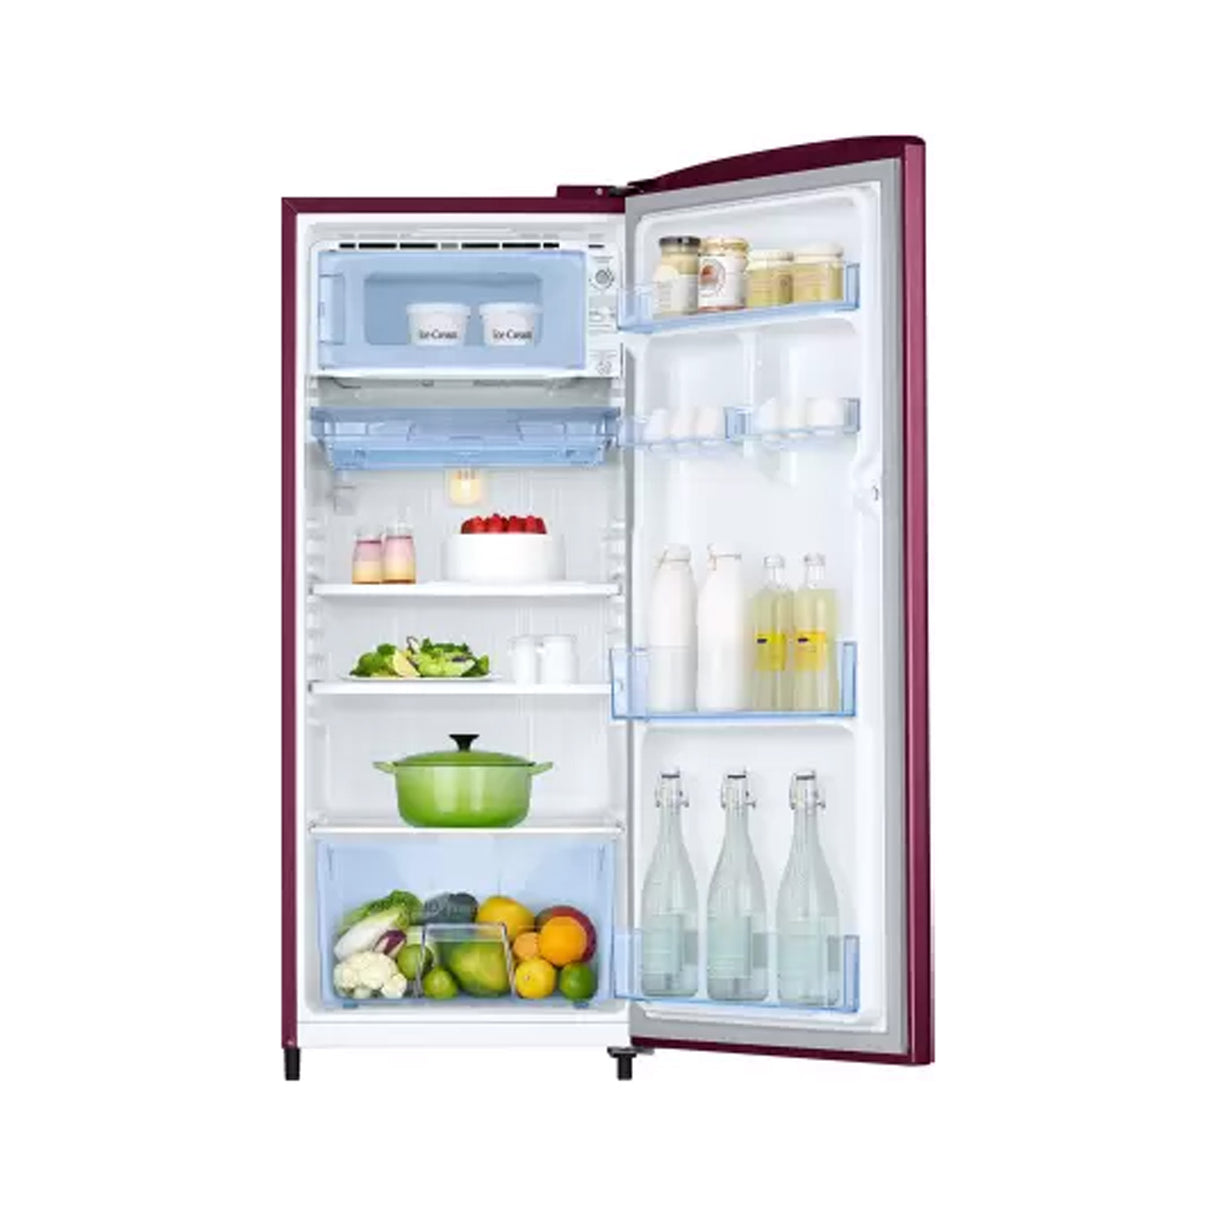 Samsung 184L Single Door Refrigerator: Blooming Saffron Red, top-tier style and function.